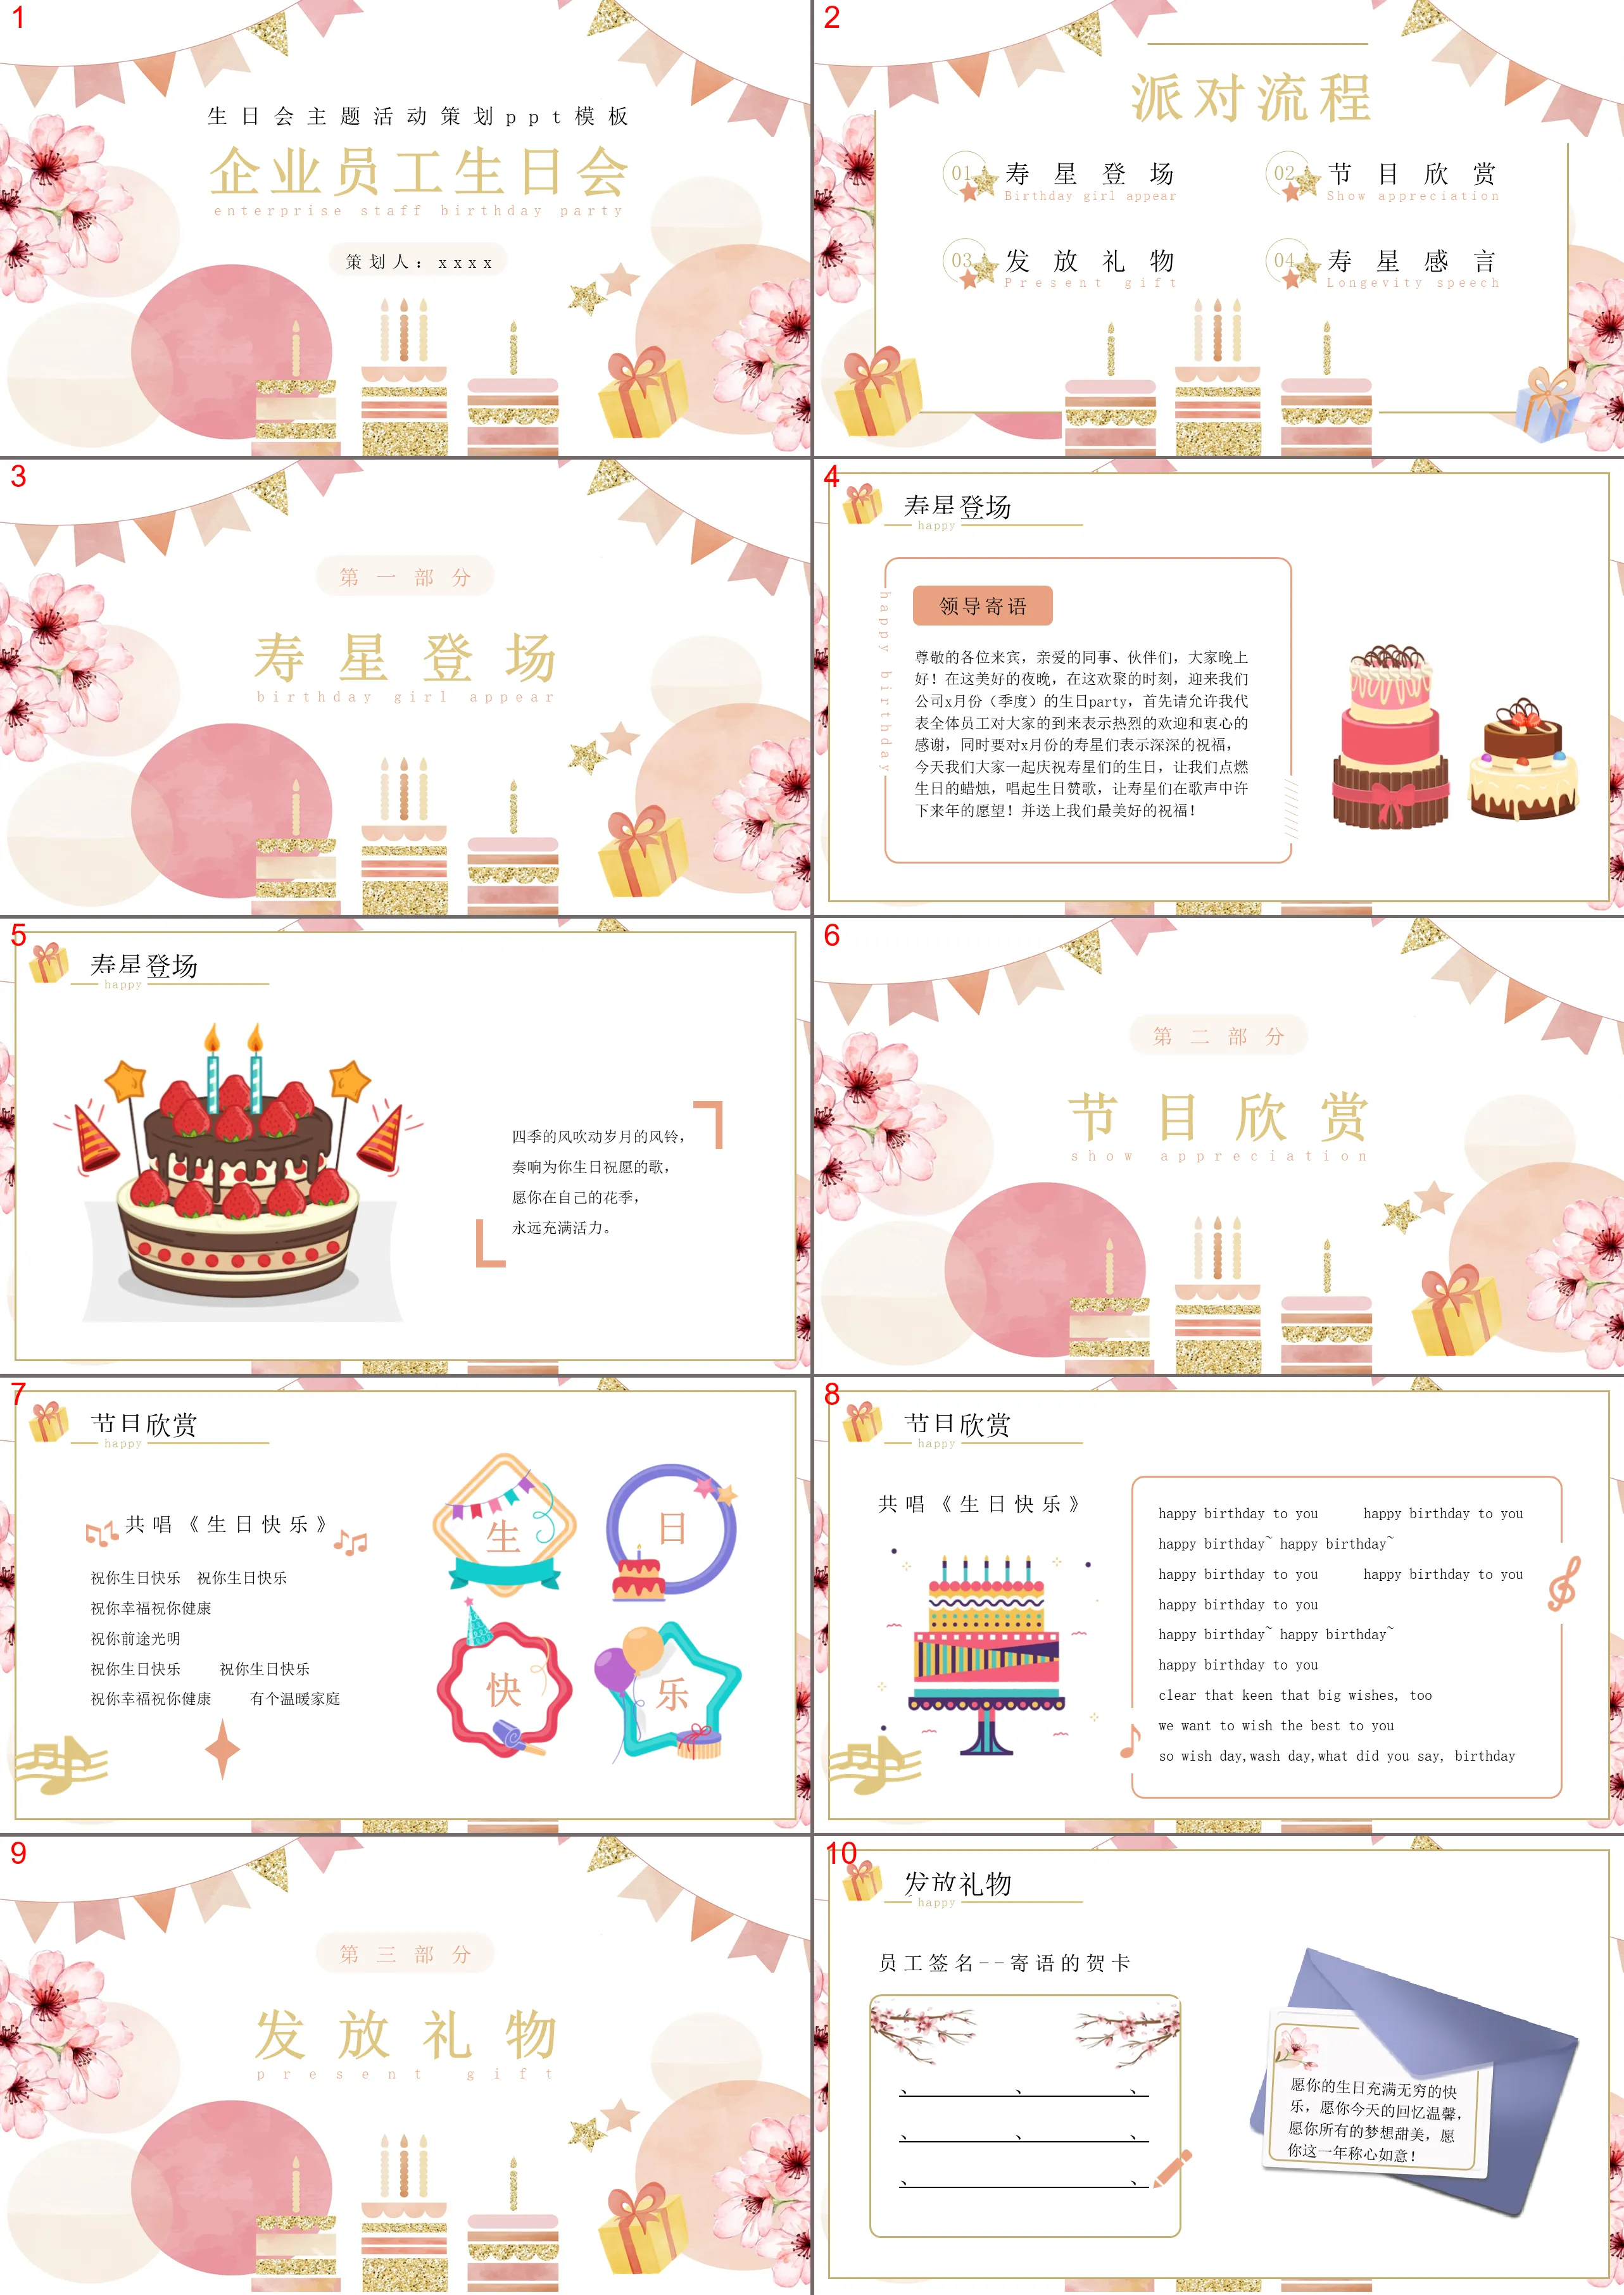 Enterprise staff birthday party birthday party theme activity planning PPT template Enterprise staff birthday party planner: xxxx template manual submission, birthday wishes, 2